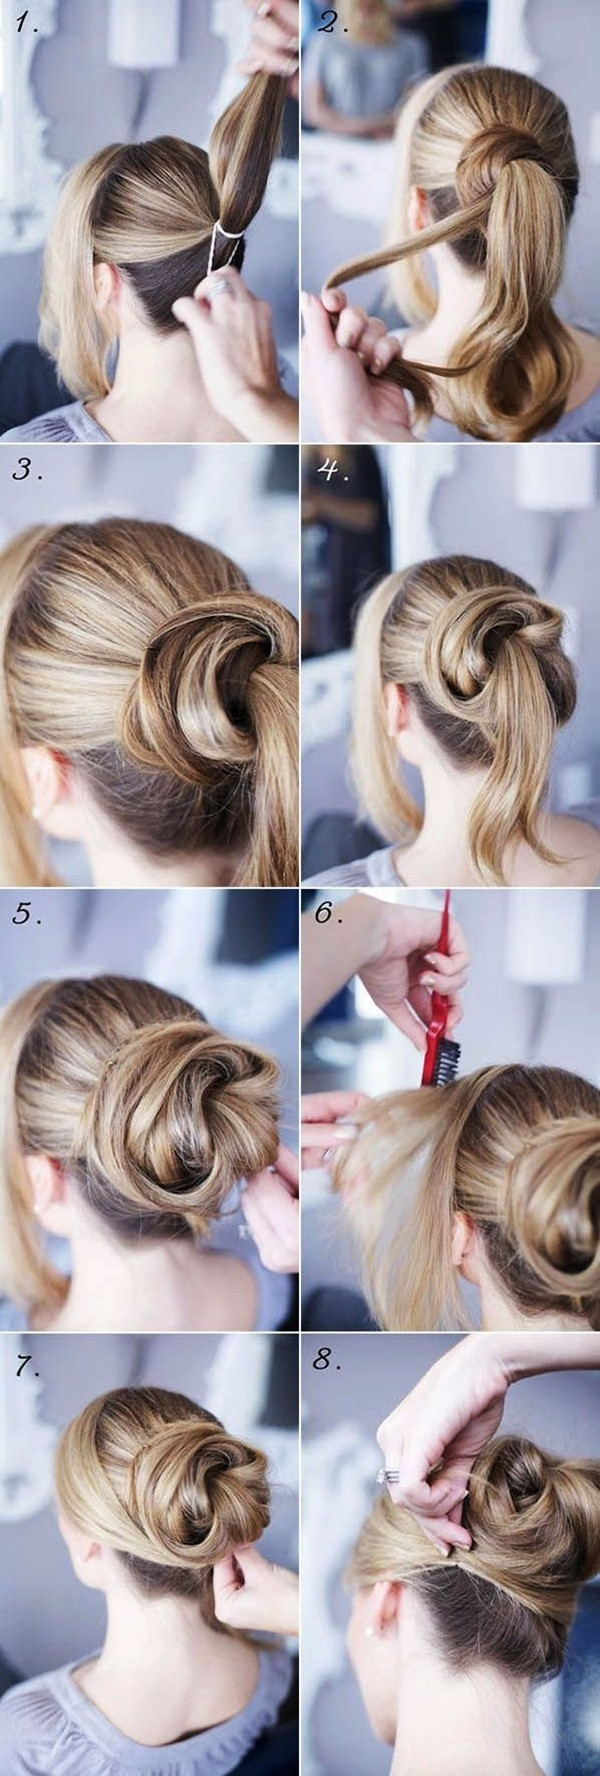 Easy Hairstyles For Medium Hair Step By Step
 15 Easy Step By Step Hairstyles for Long Hair